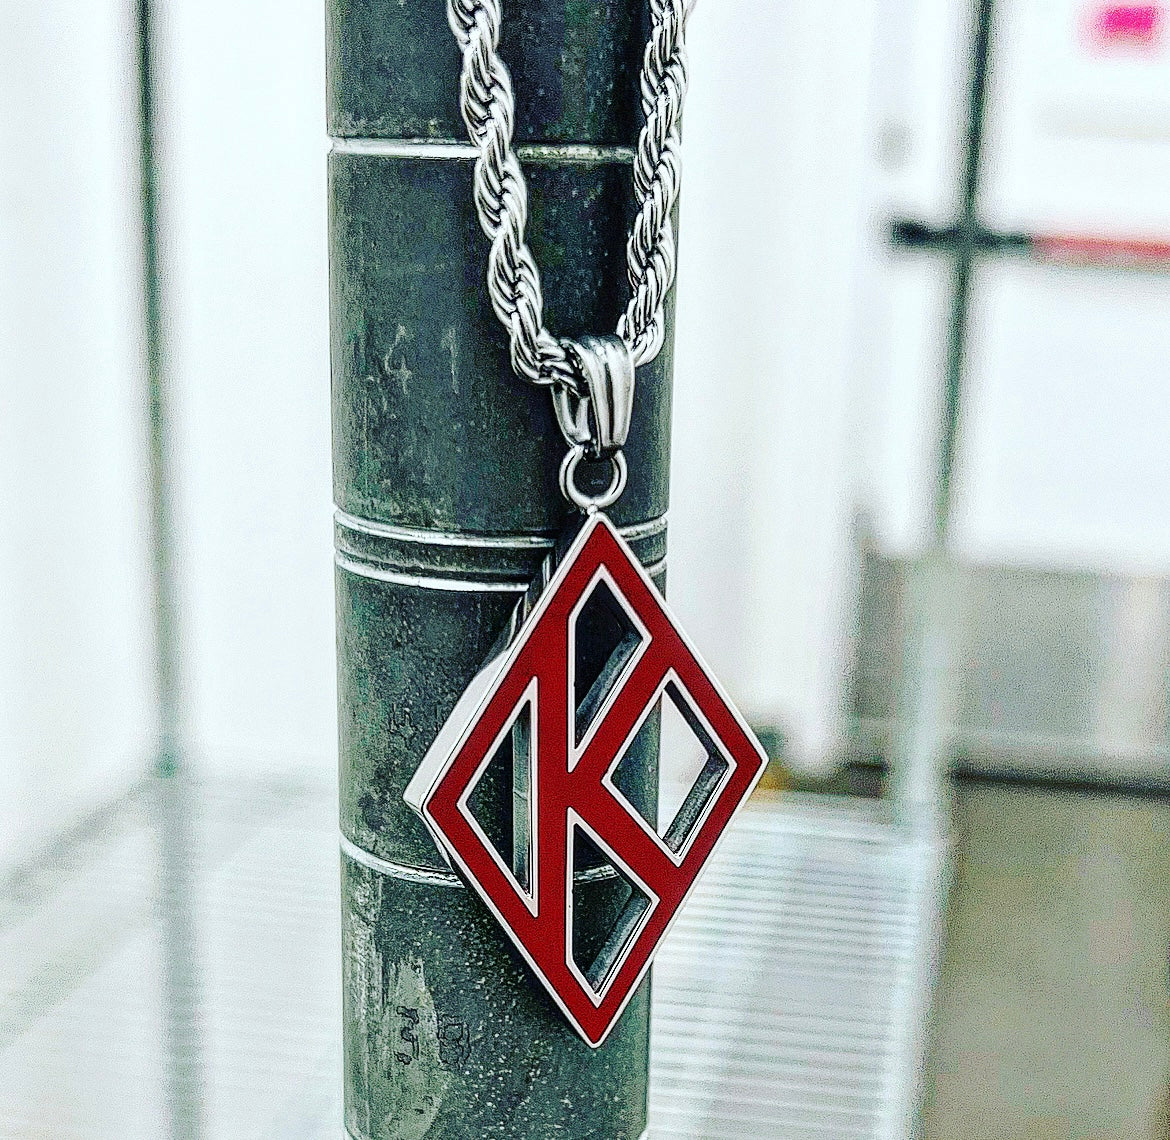 This stunning men's jewelry piece is the perfect way to show off your affiliation with Kappa Alpha Psi. The bold red color and intricate design make it a true standout accessory that will complement any outfit. Ideal for members of Kappa Alpha Psi fraternities , this necklace is a must-have for any collection.